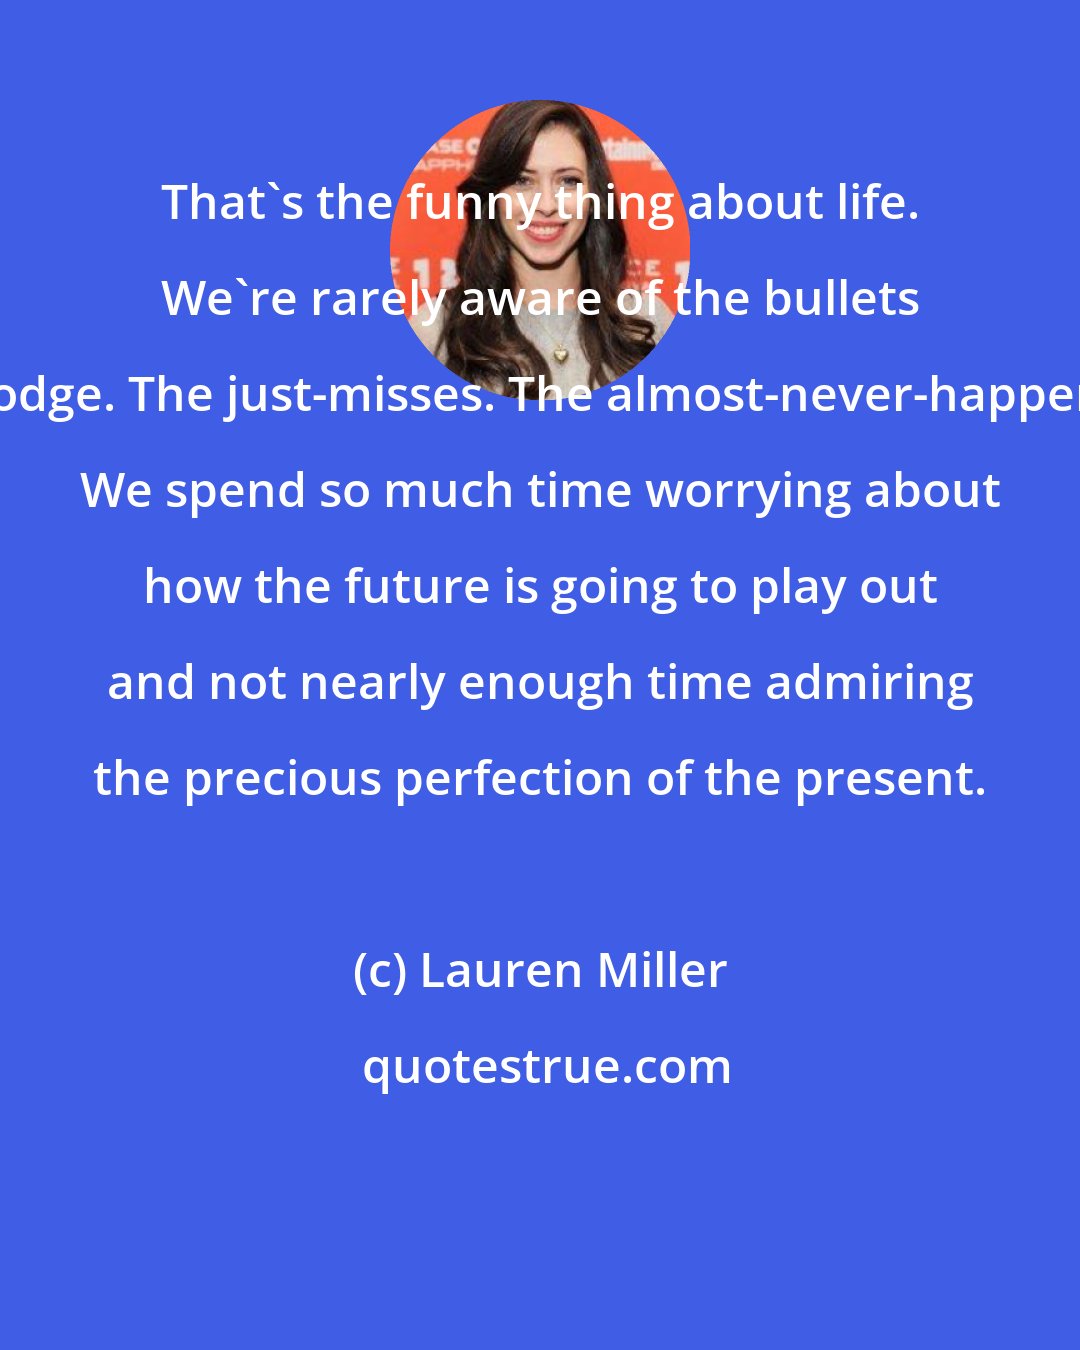 Lauren Miller: That's the funny thing about life. We're rarely aware of the bullets we dodge. The just-misses. The almost-never-happeneds. We spend so much time worrying about how the future is going to play out and not nearly enough time admiring the precious perfection of the present.